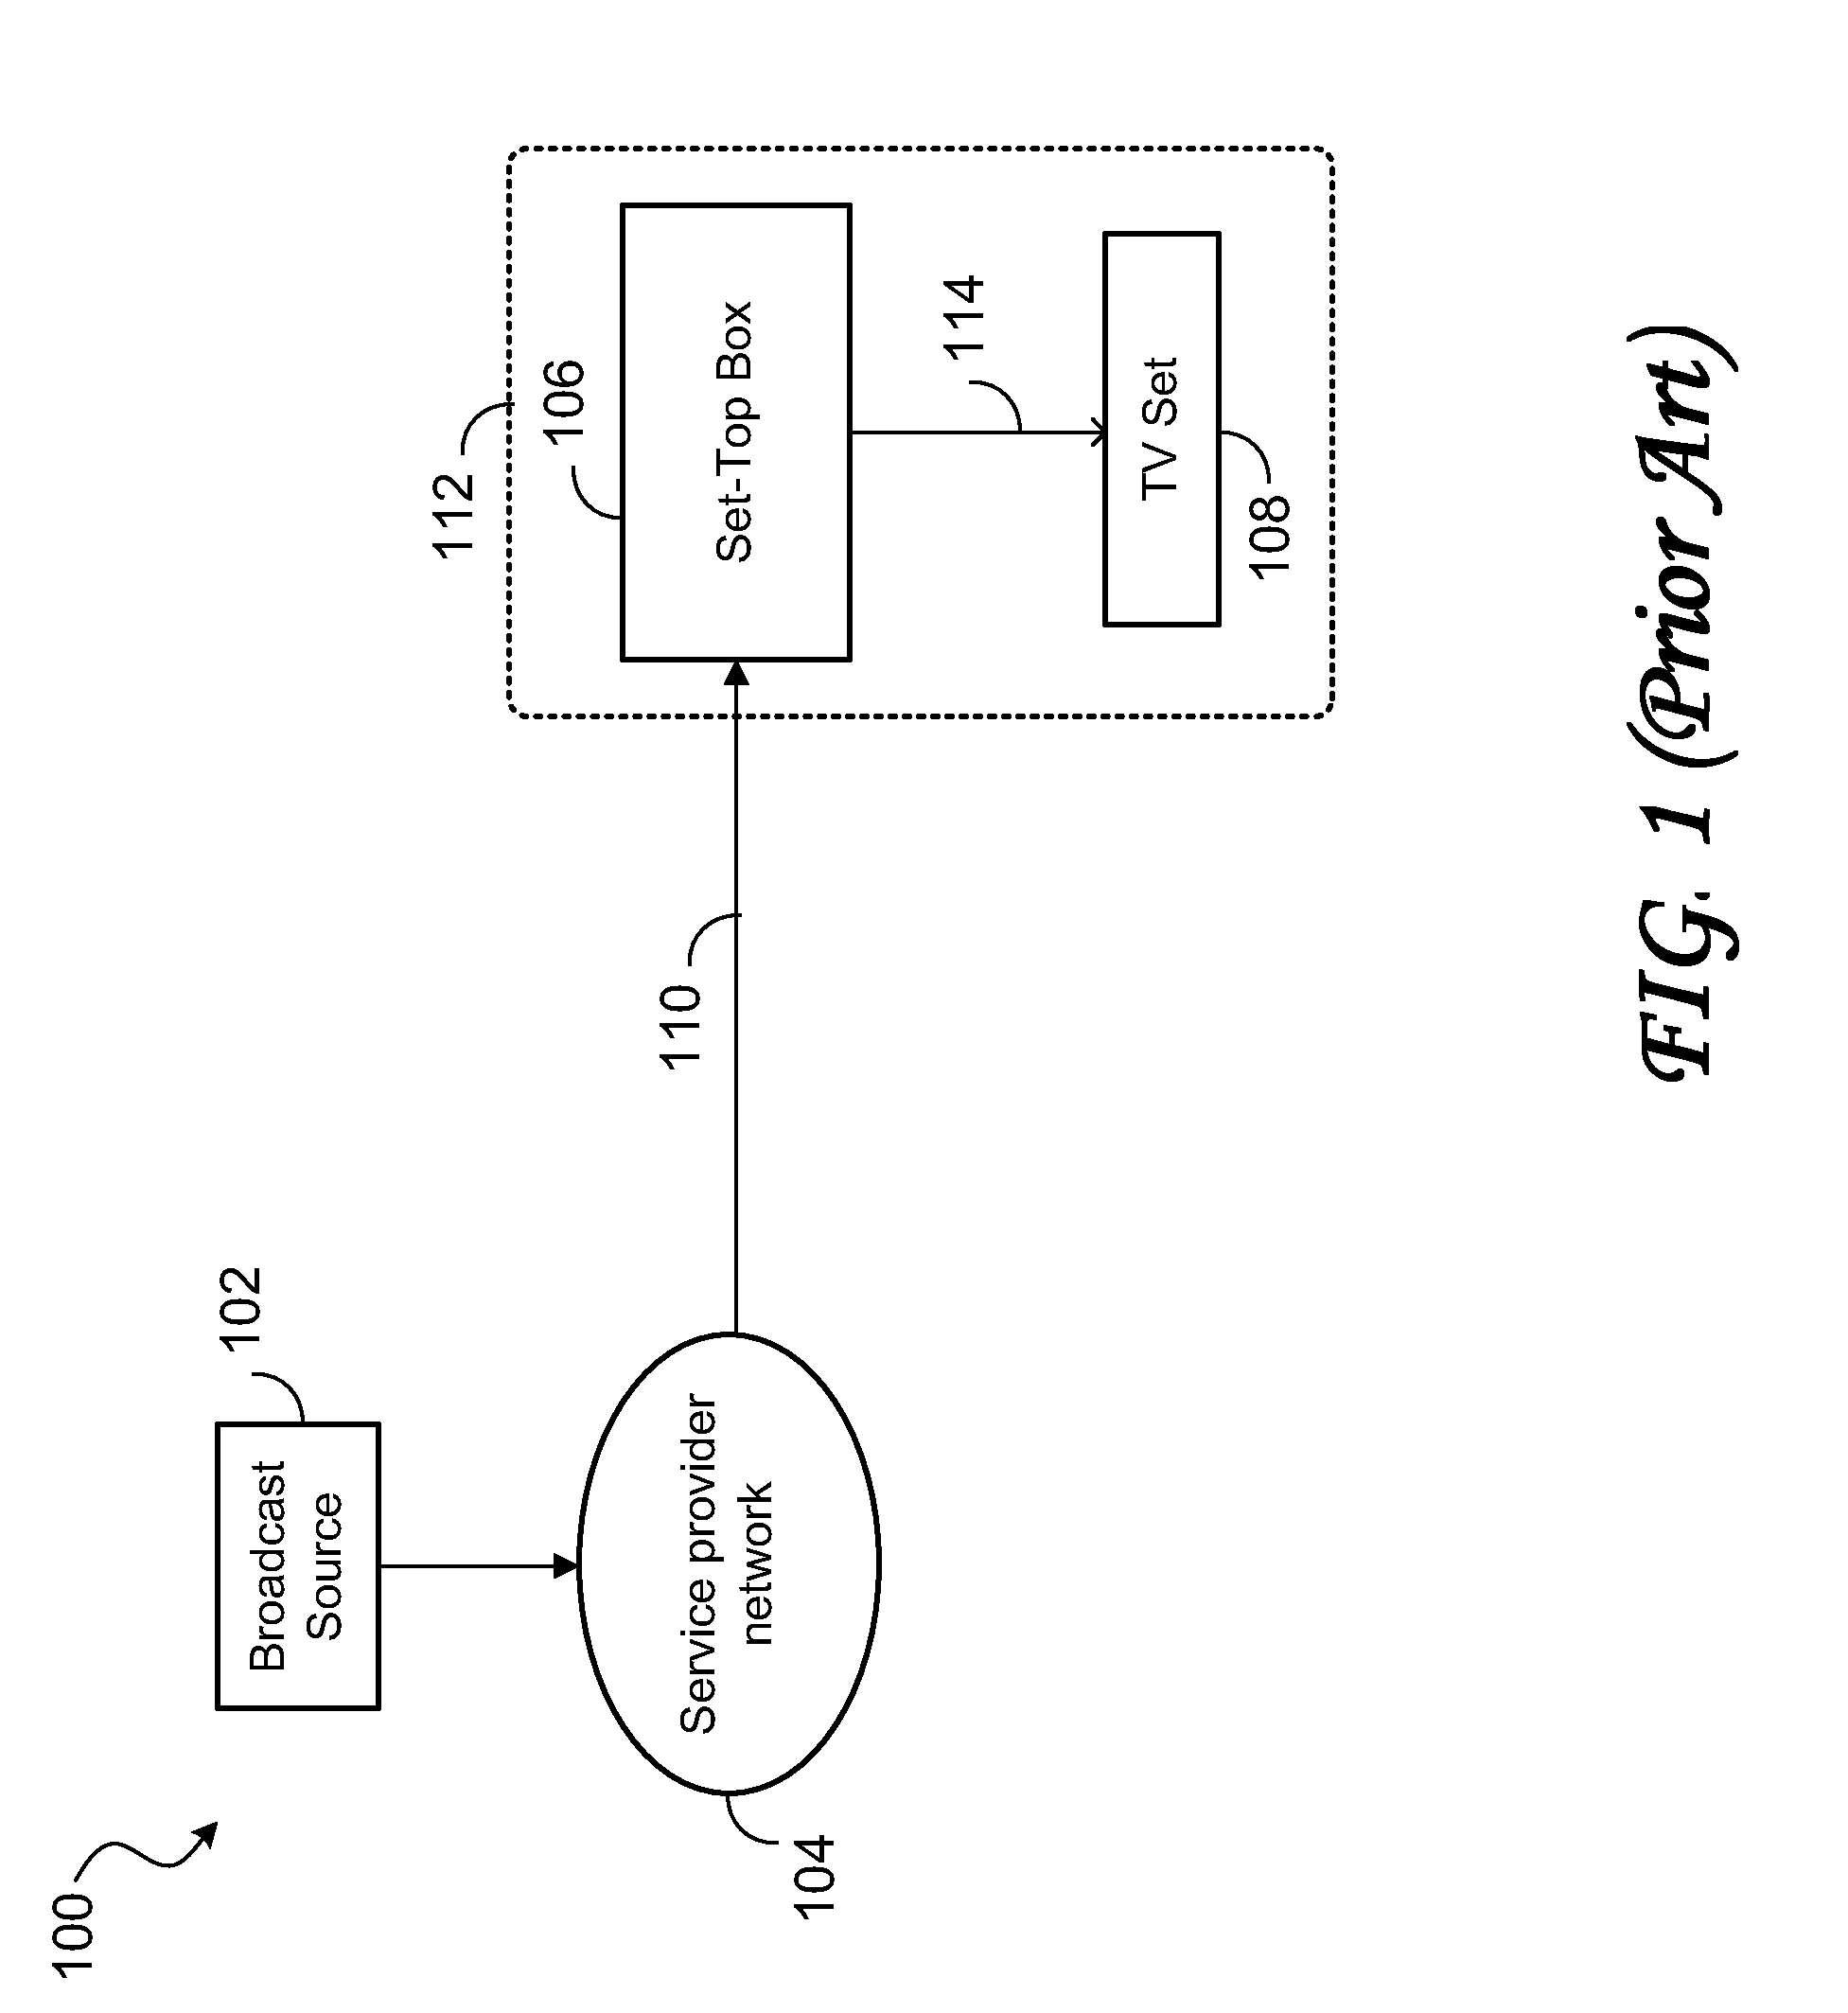 Realtime broadcast stream and control data conversion system and method